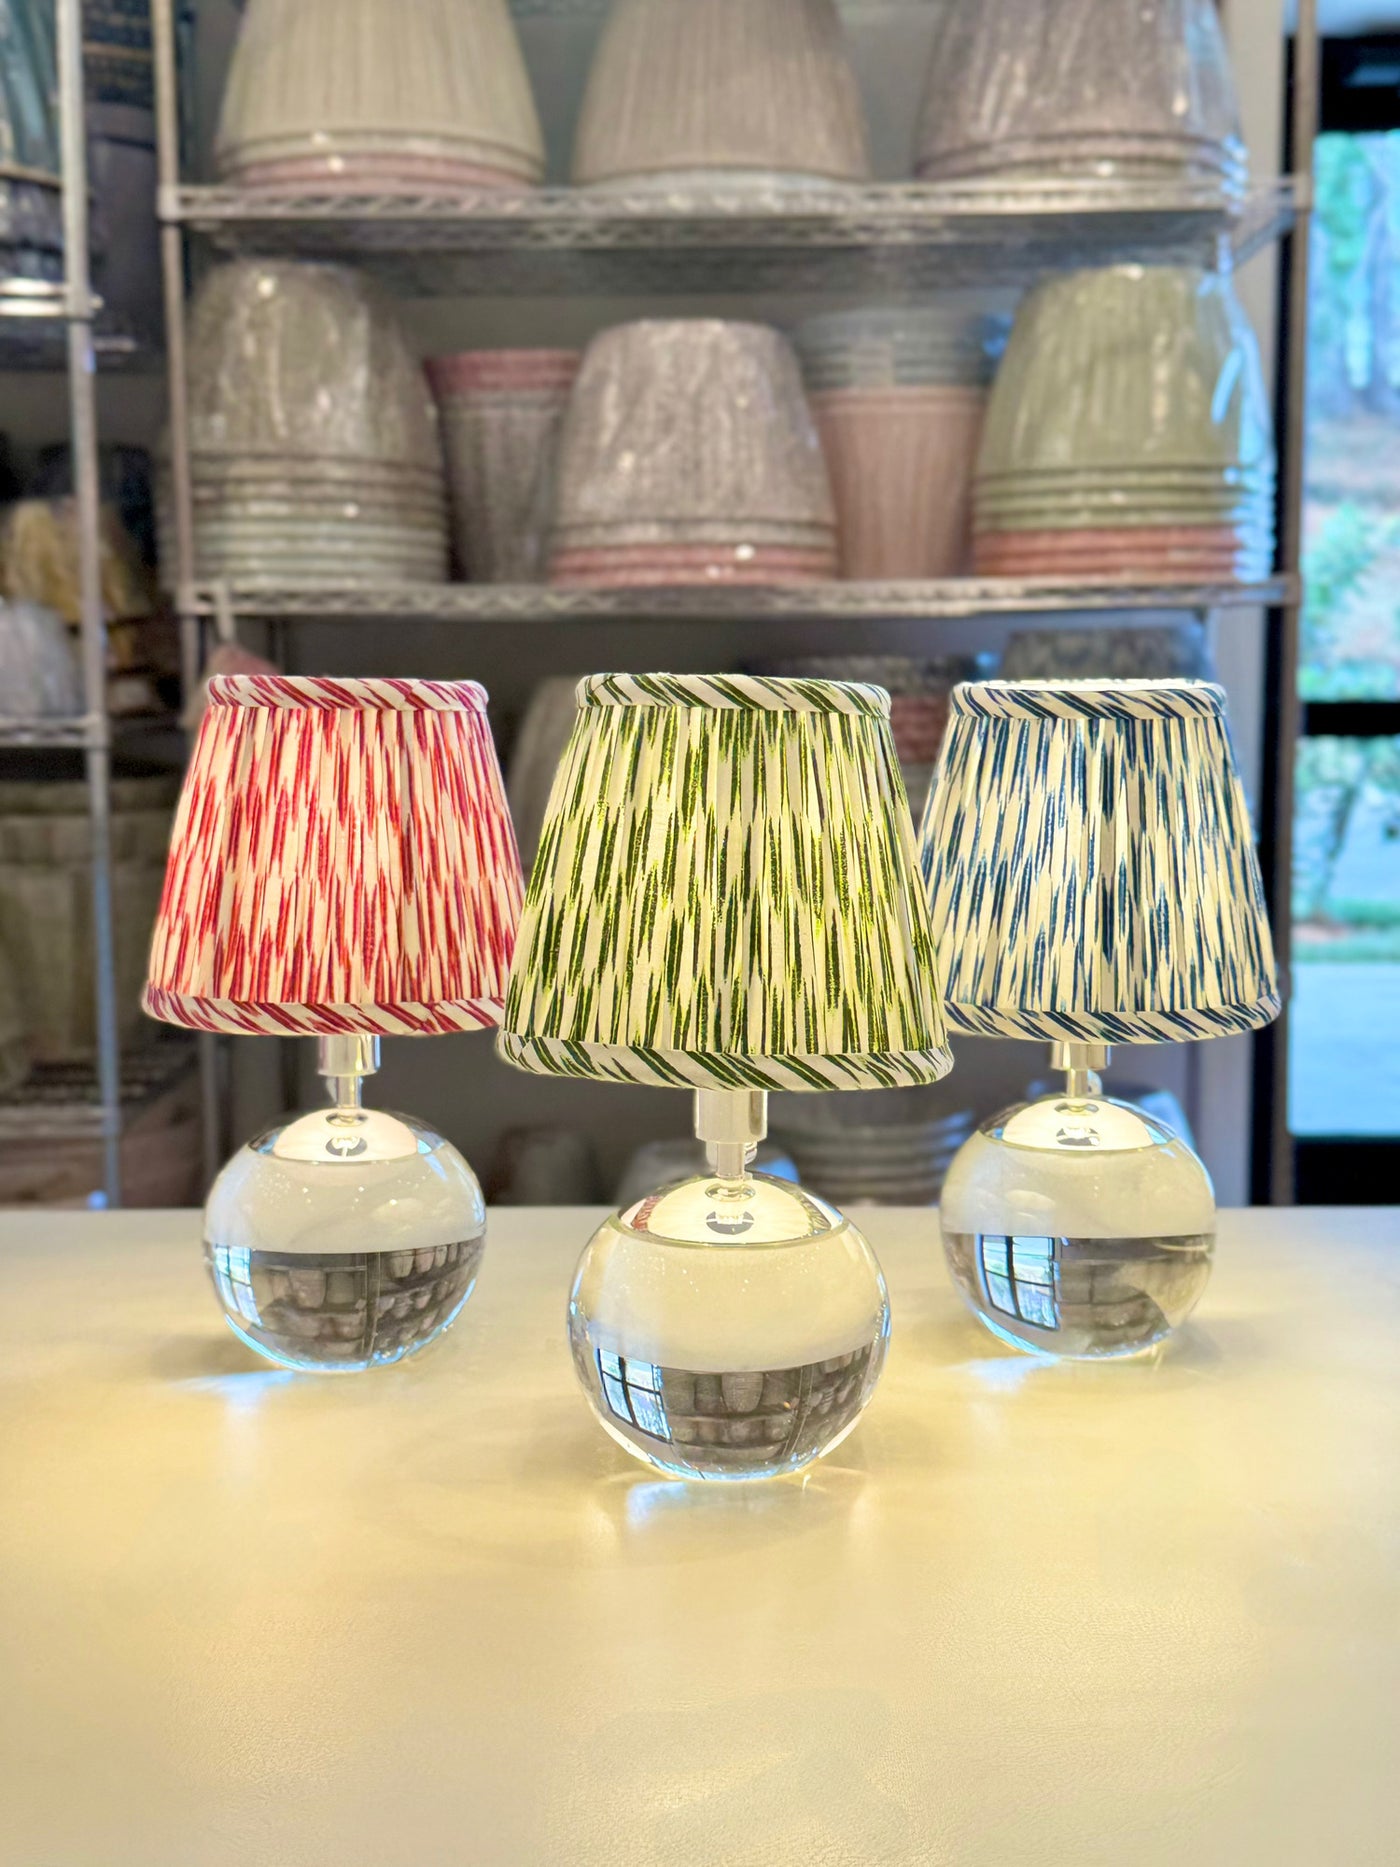 Tiny Terry Lamps and Ian Sanderson Lampshades